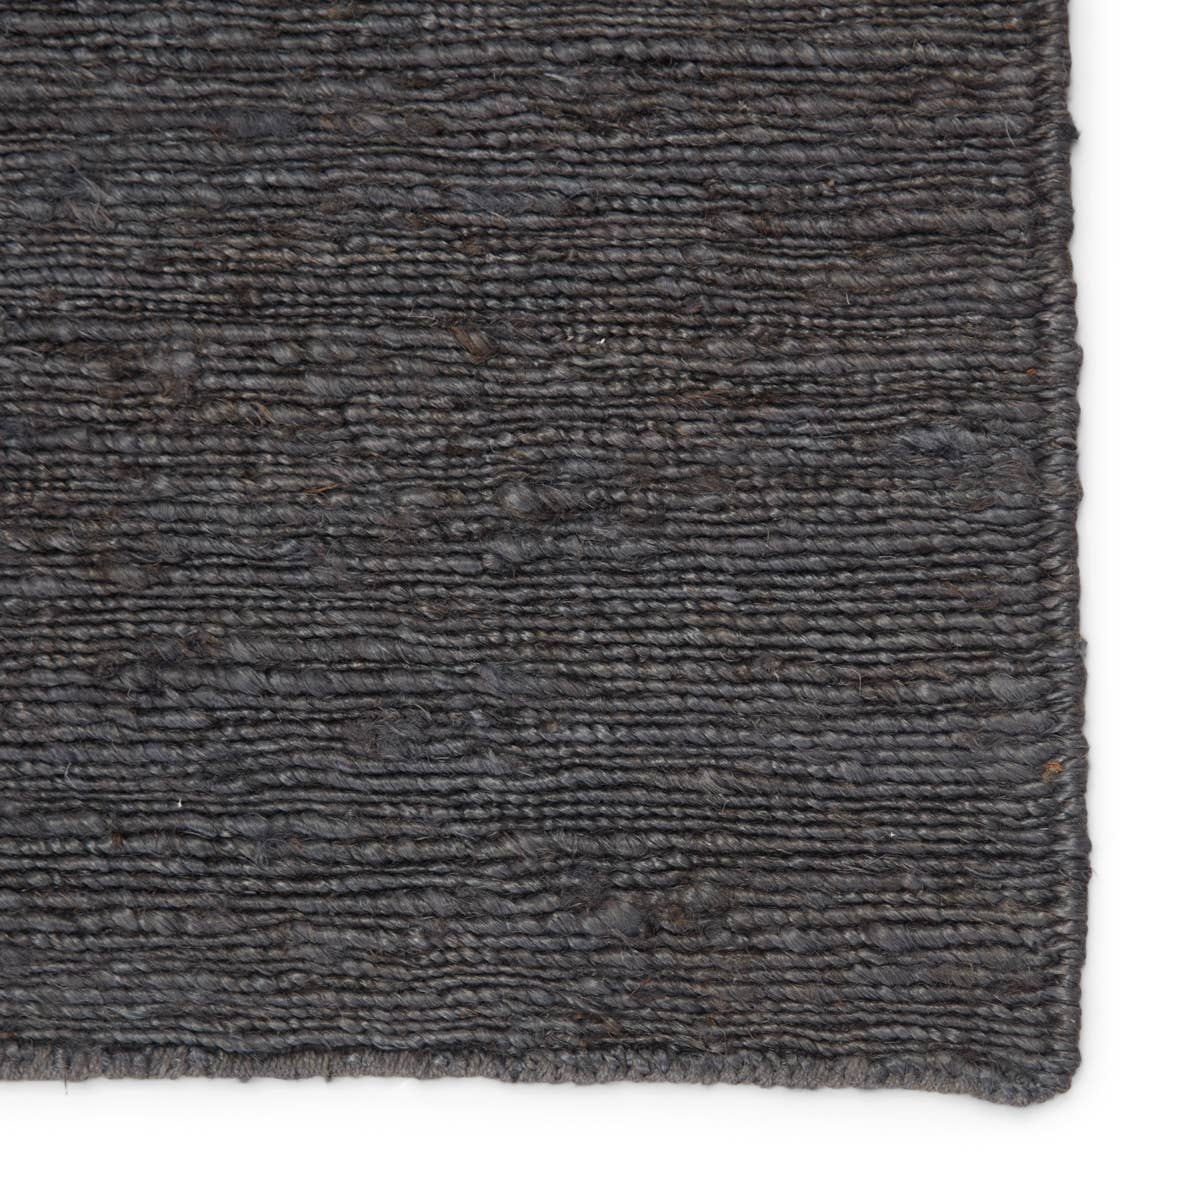 The Sabine collection lends rich texture and organic allure to modern homes. The Linden rug features a fine, single-line Sumak knotting technique for an exquisite feel and craftsmanship. This rich, black natural rug is the perfect accent for sophisticated spaces in want of a grounding layer. Natural  80% Jute I 20% Cotton SAB02